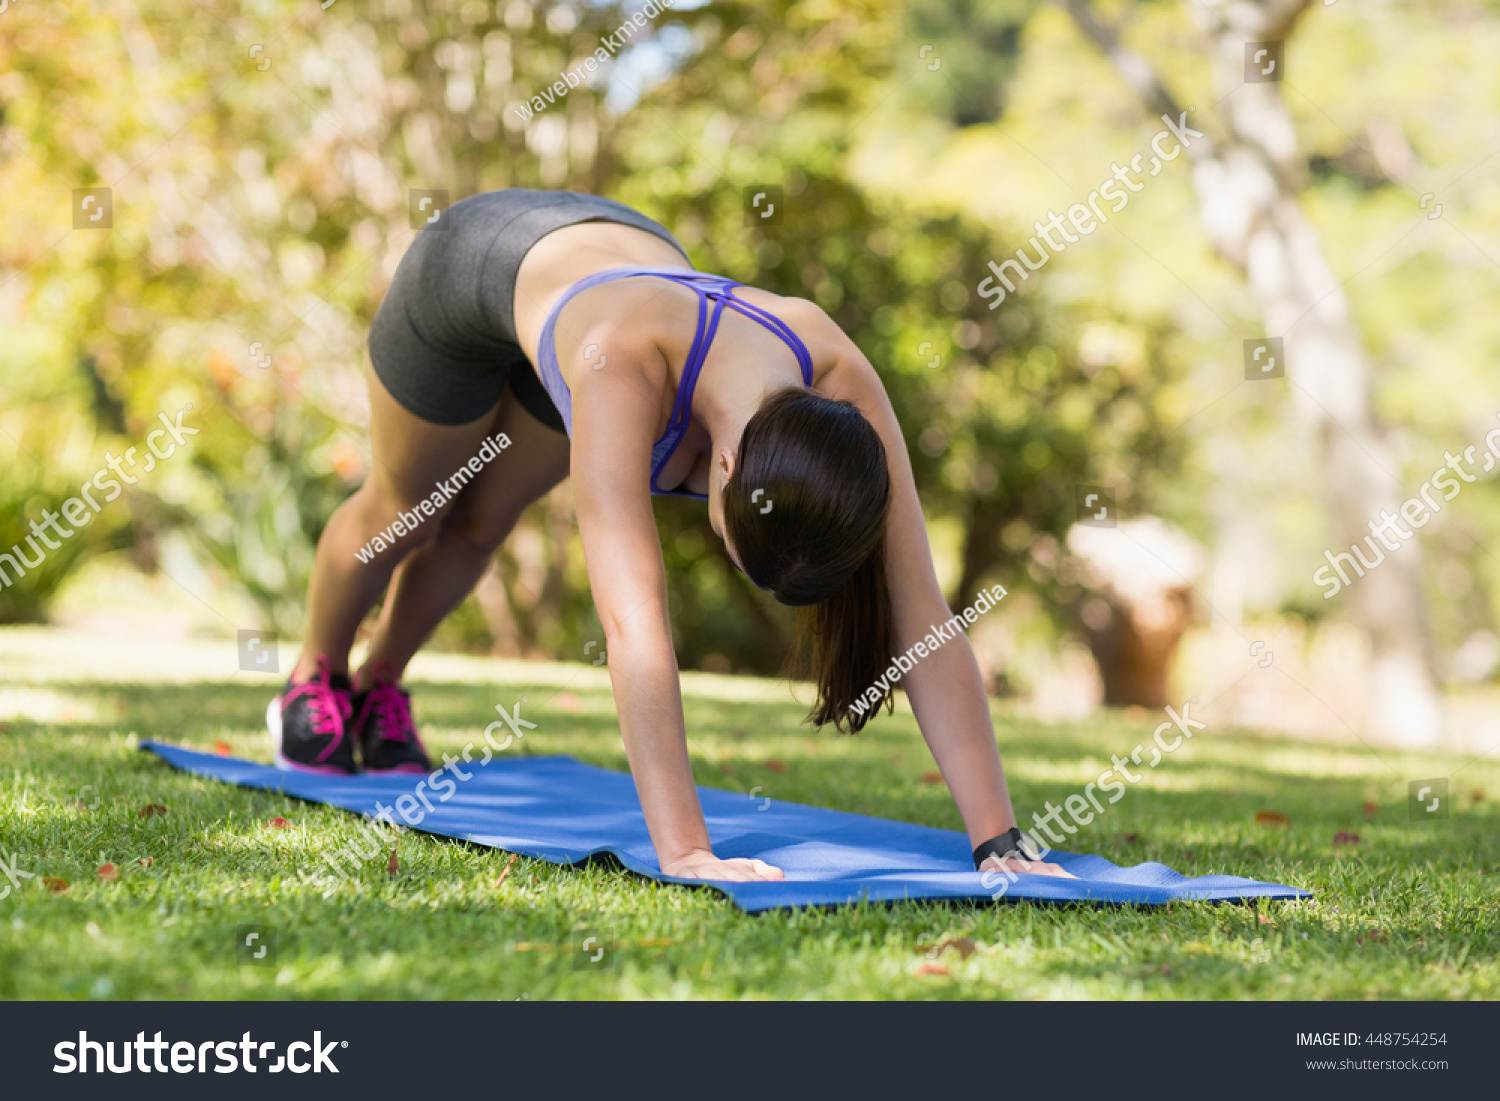 Young woman doing yoga in park #448754254